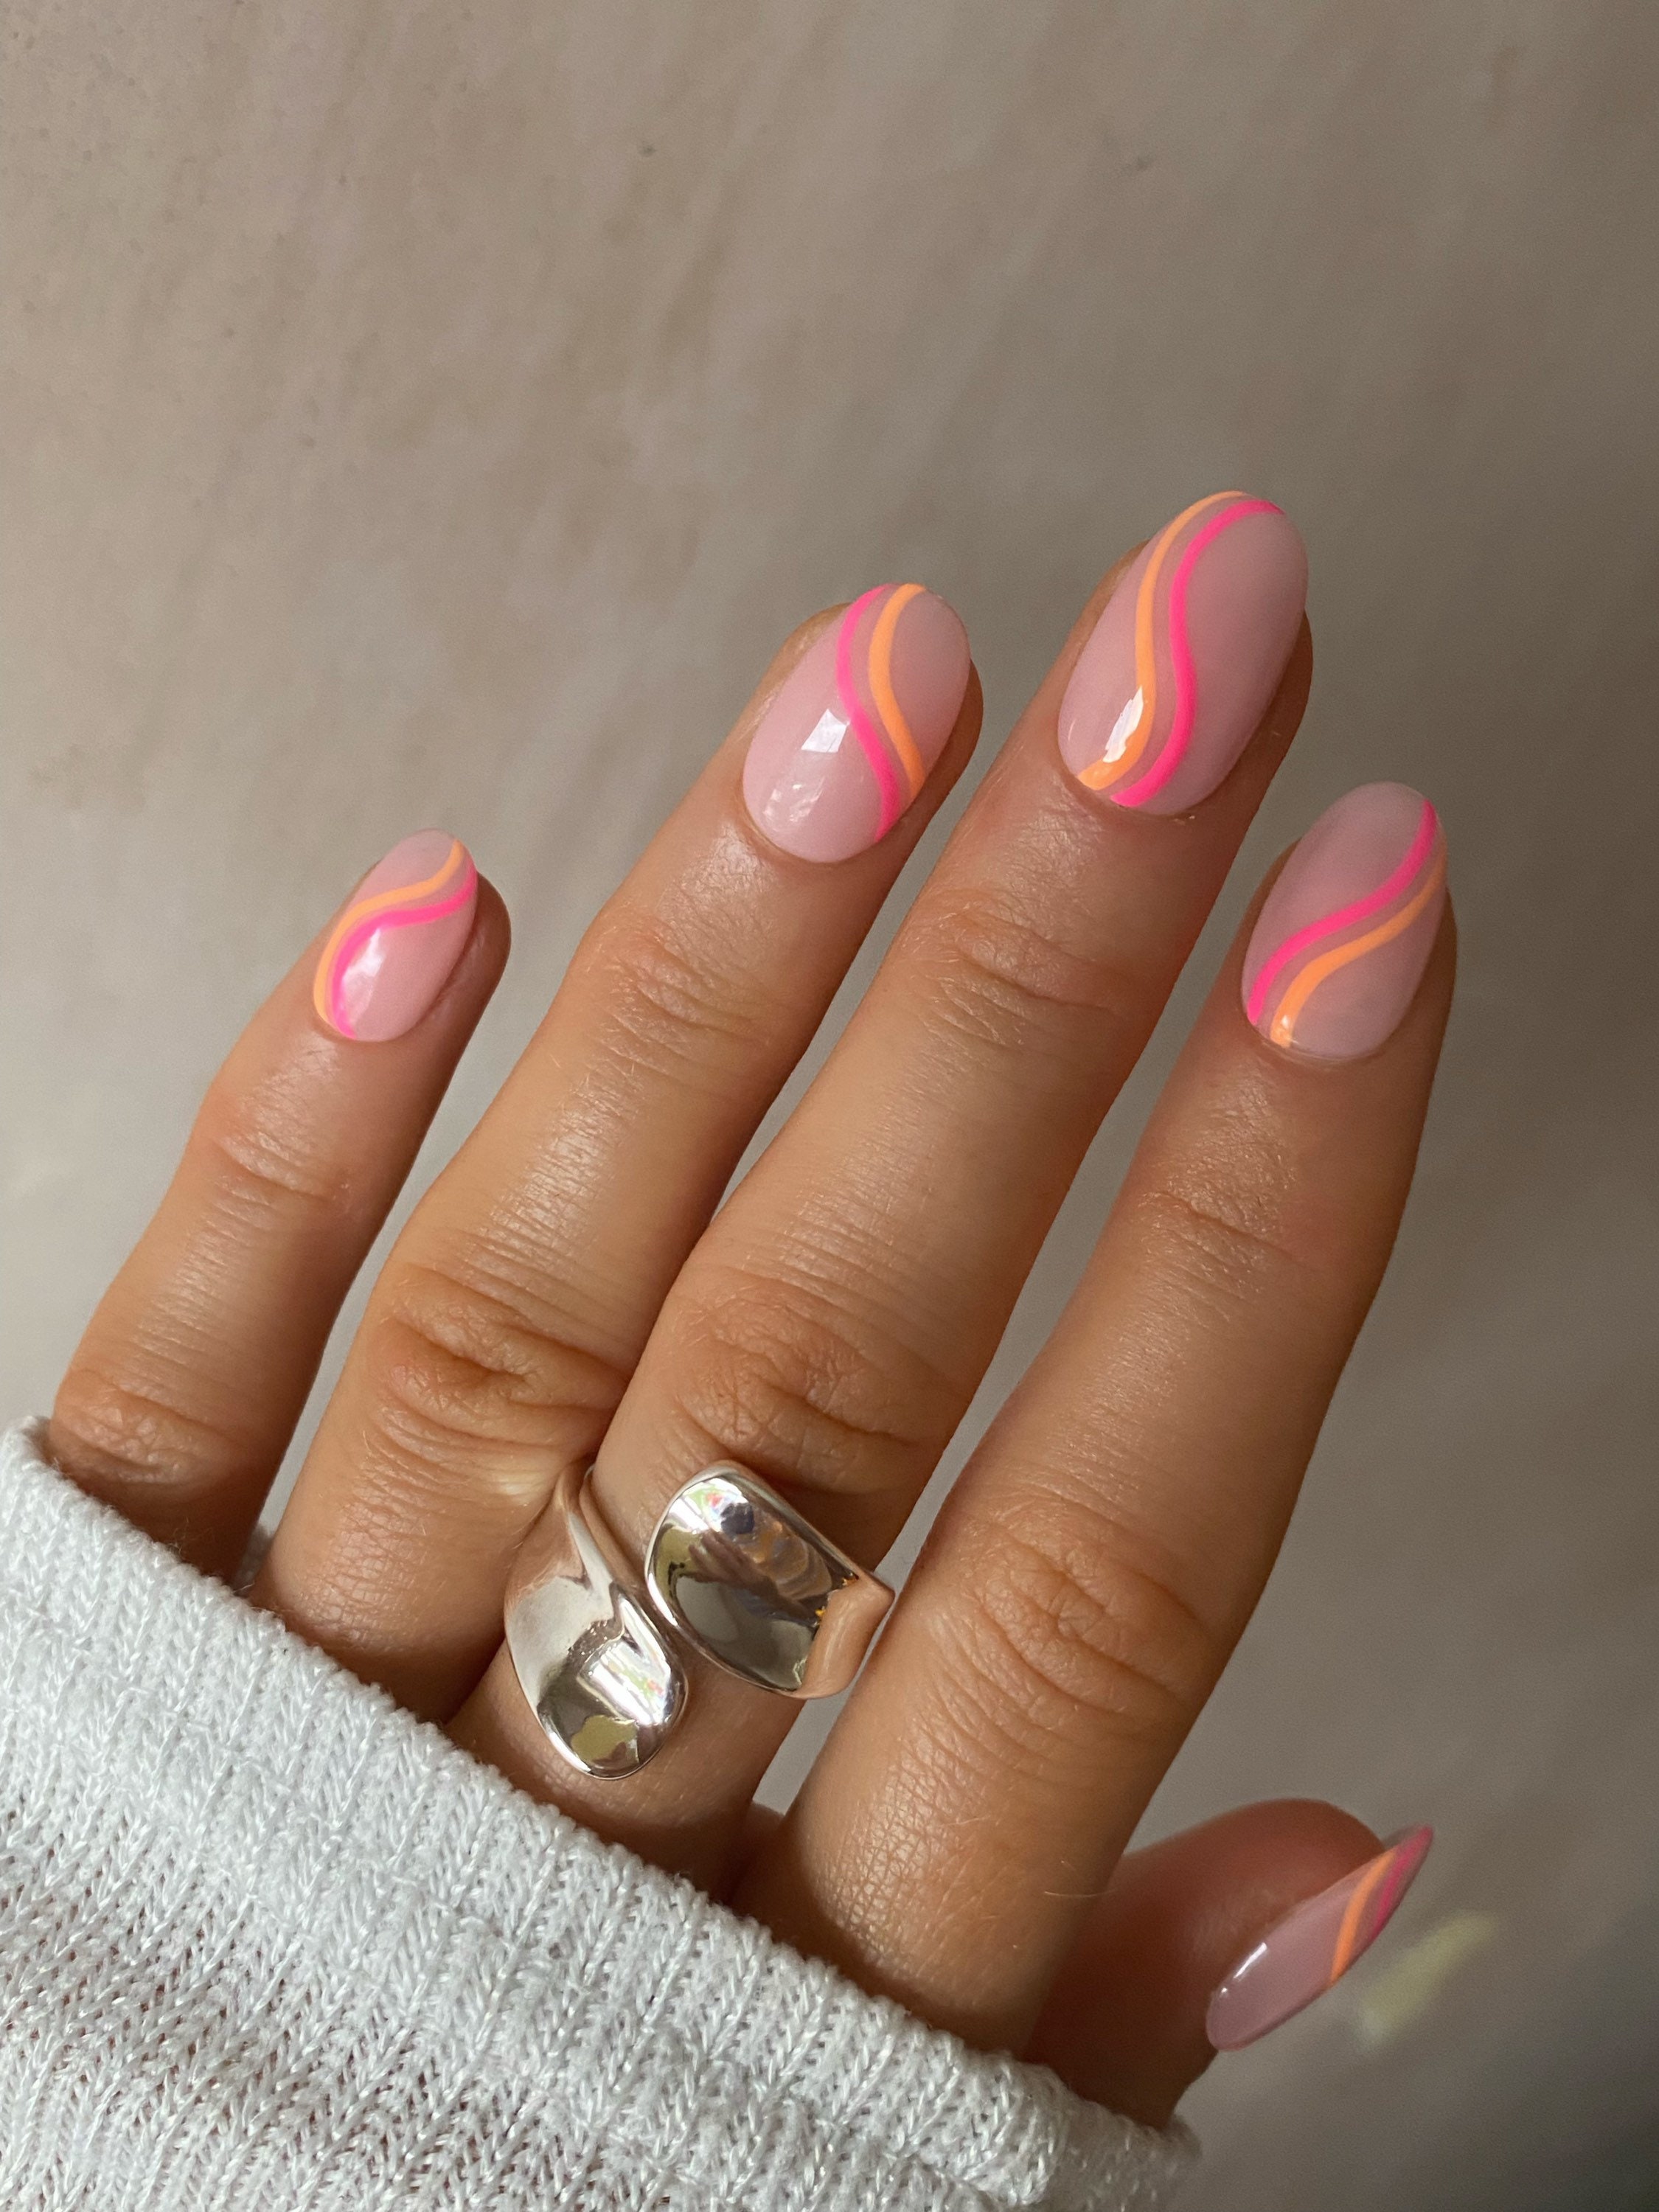 42 Trending Chrome Nails for Inspo in 2023 + How to DIY